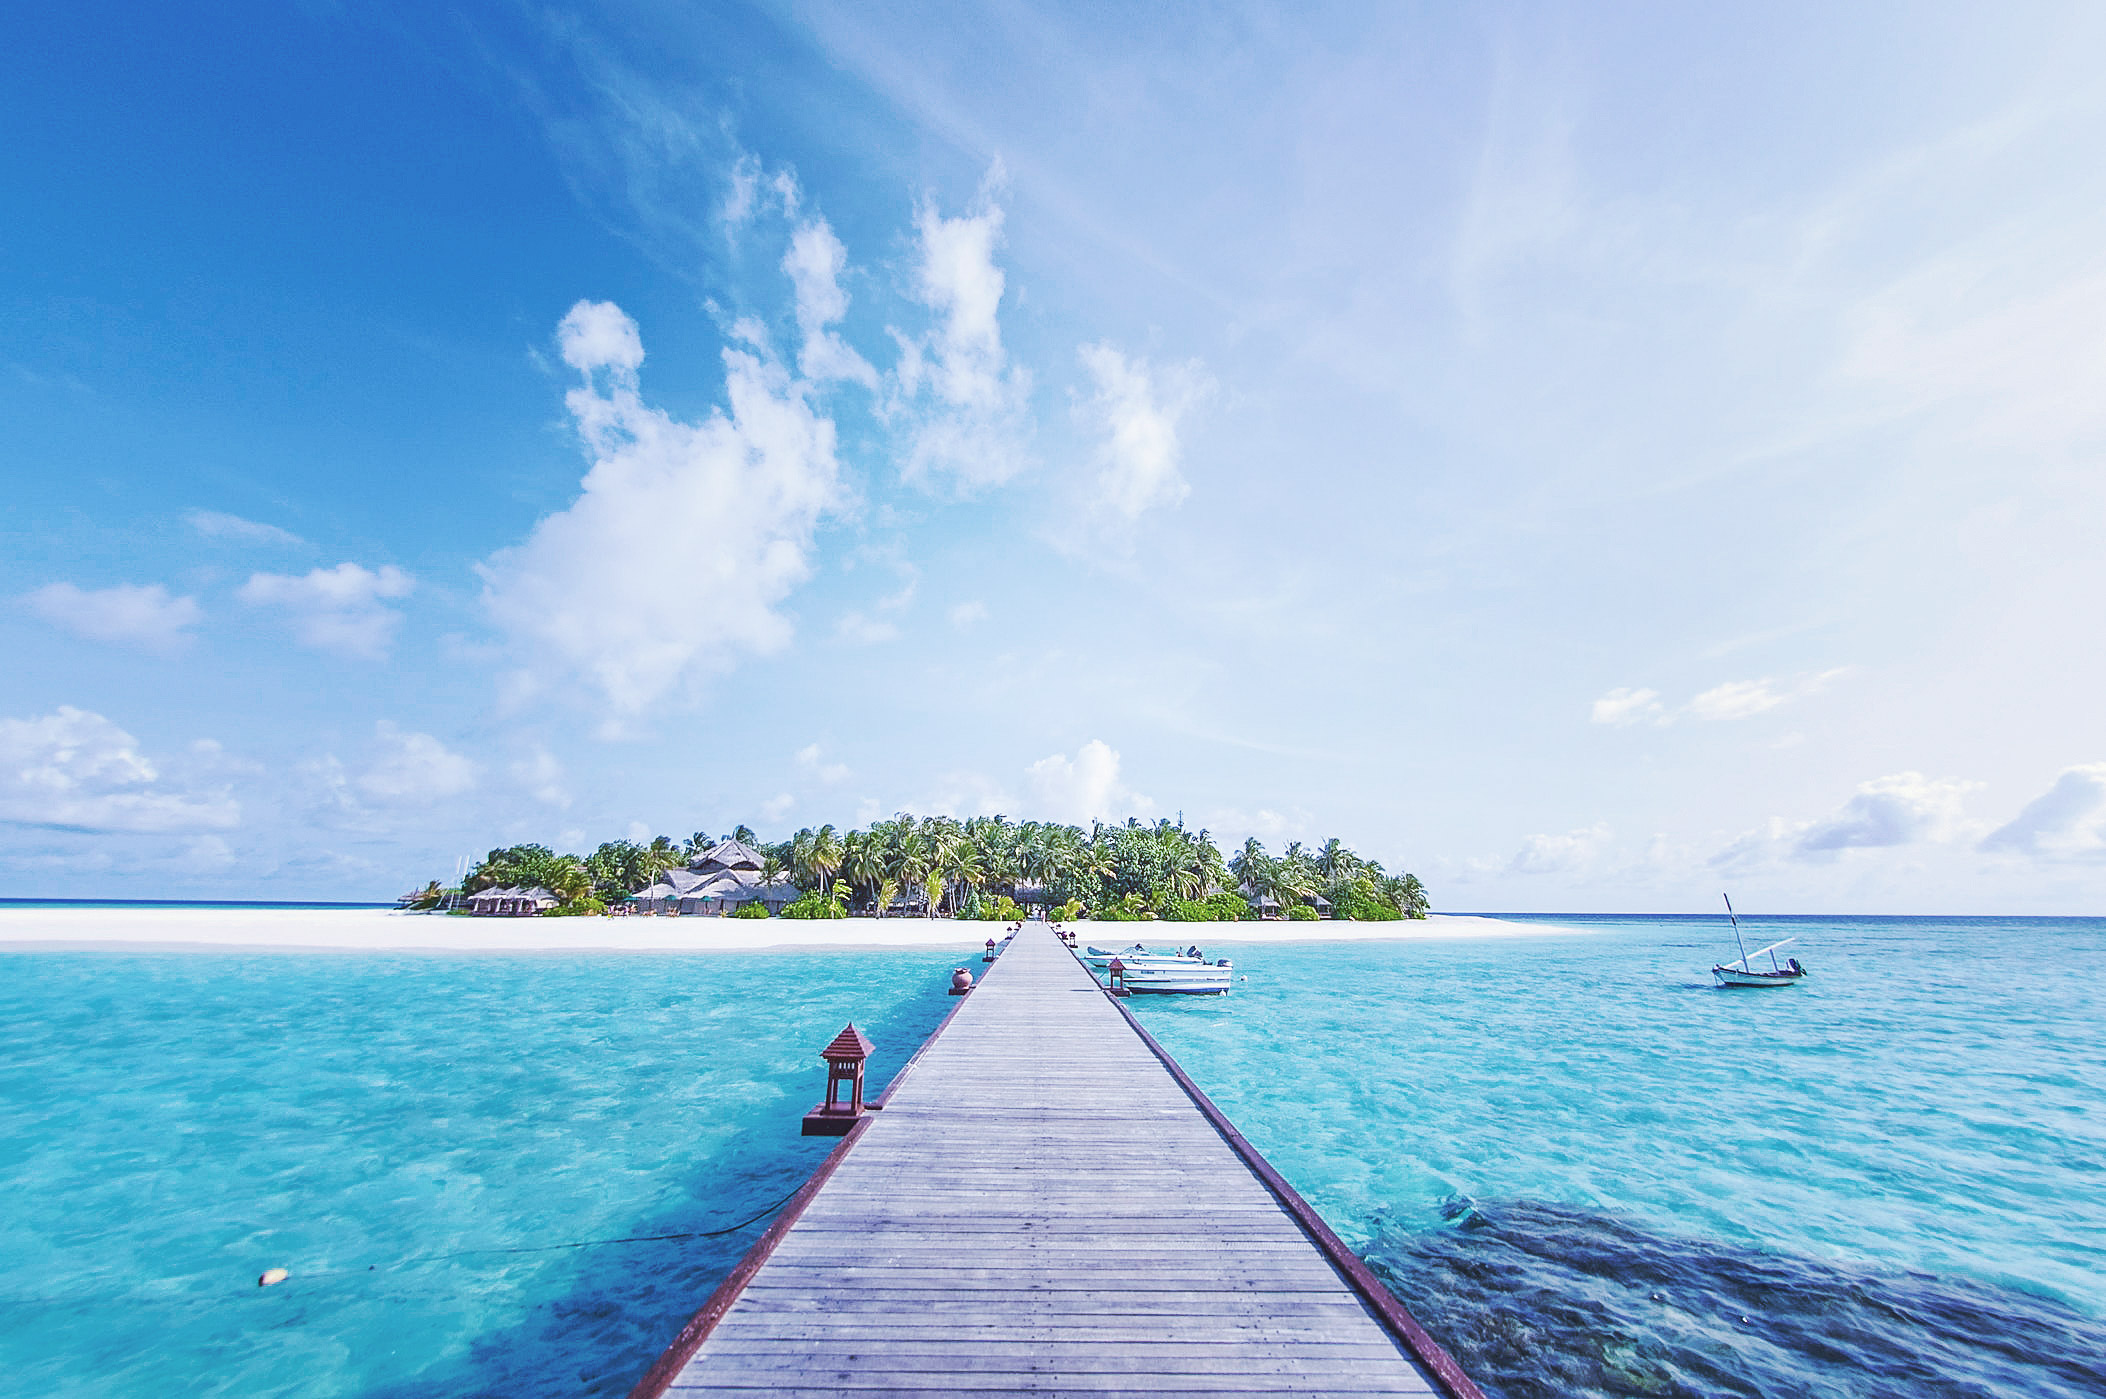 Holidays to the Maldives: Top Tips for Your Dream Vacation